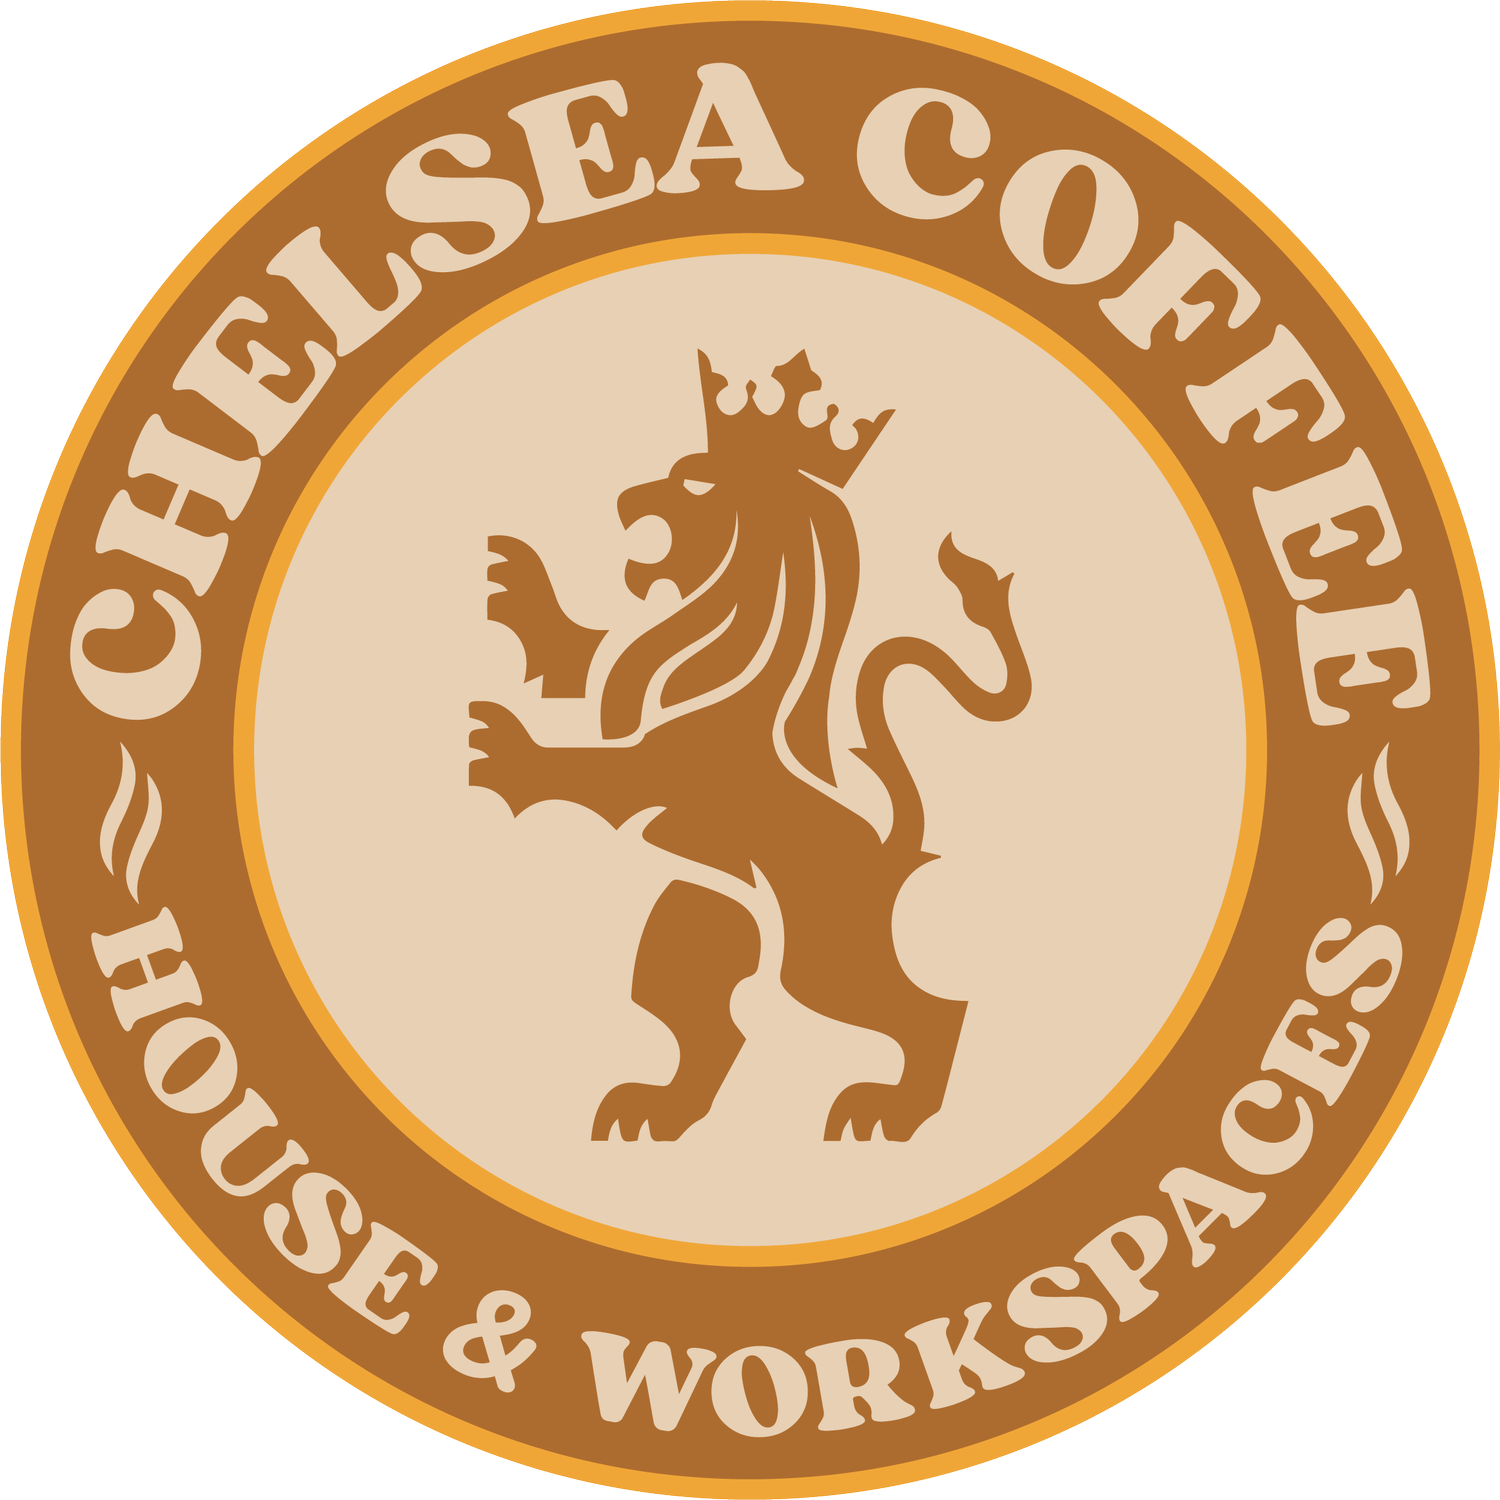 Chelsea Coffee House &amp; Workspaces